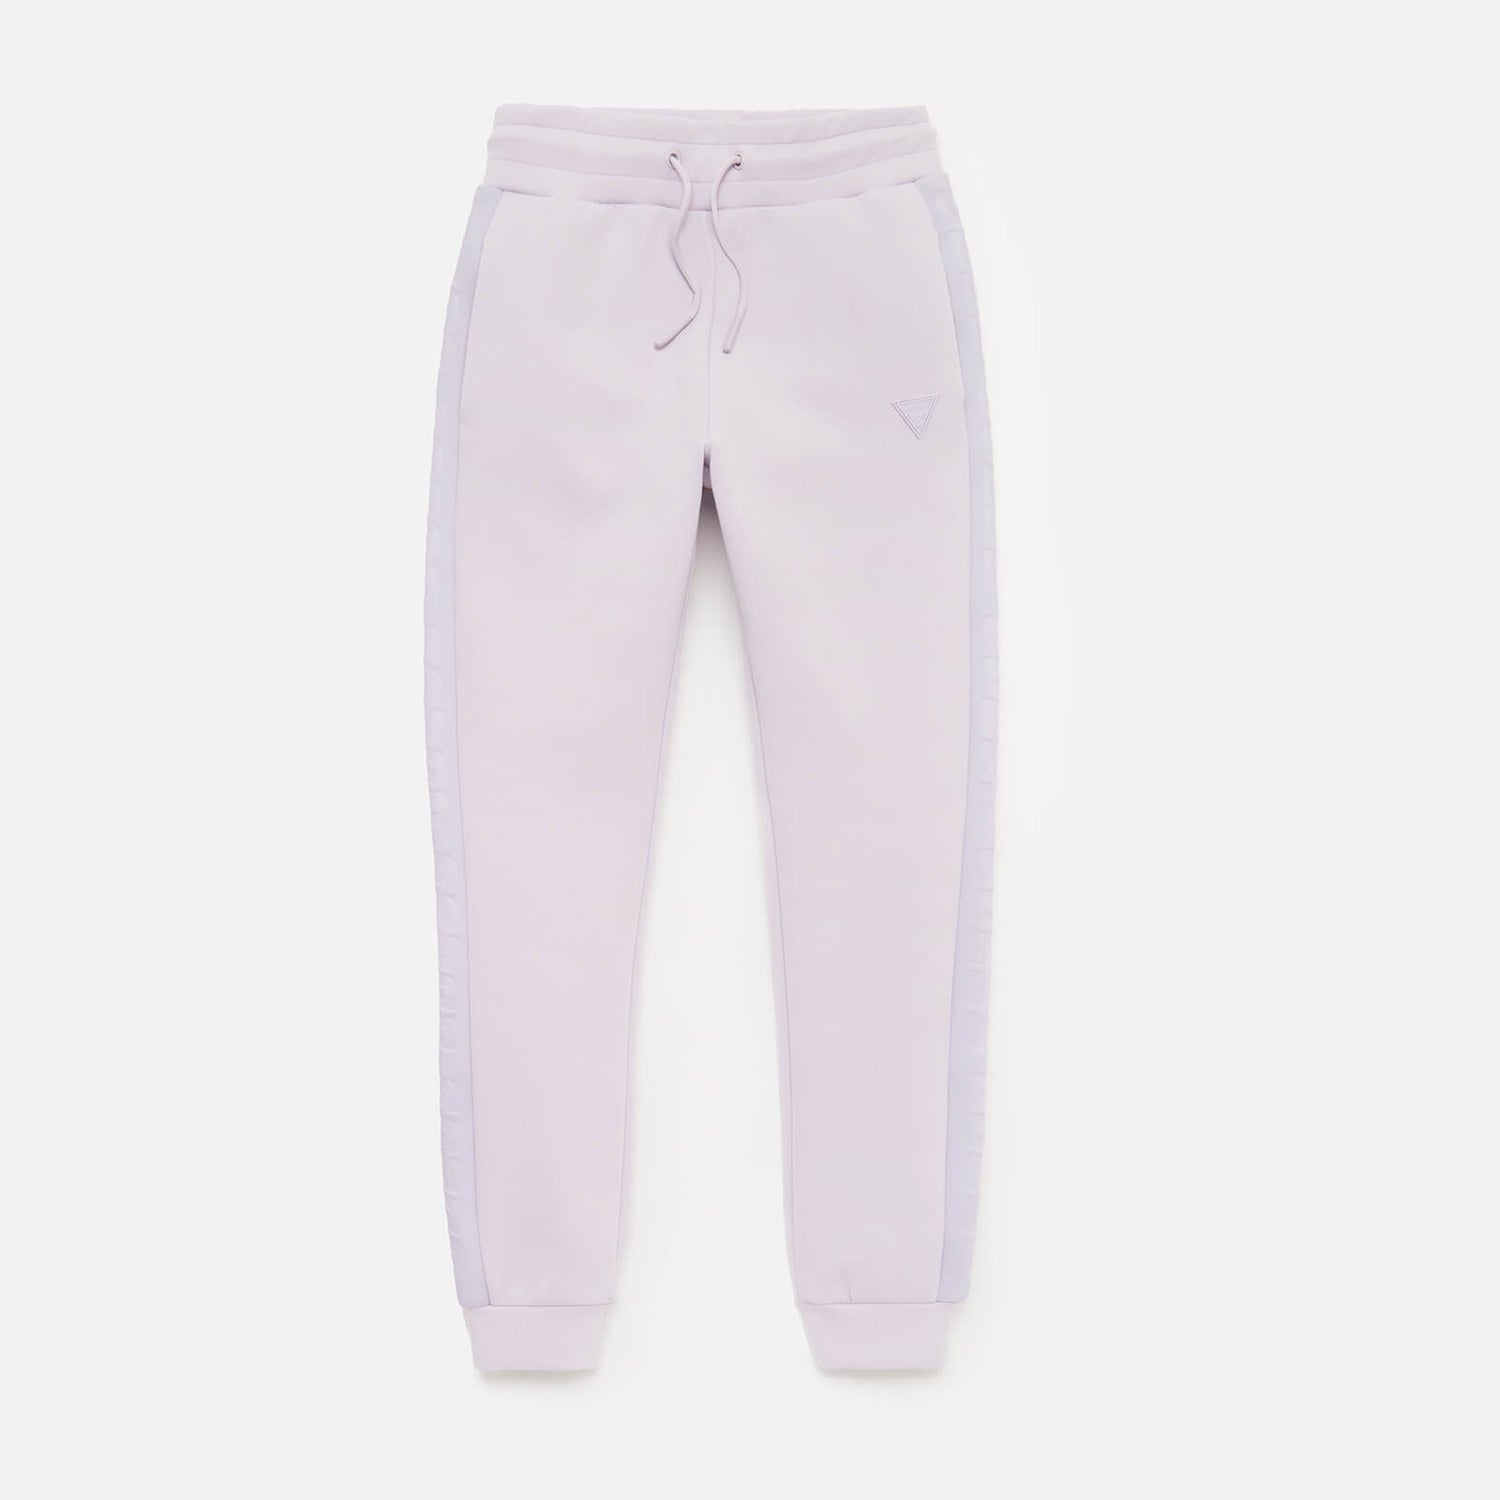 Guess Girls Active Sports Pants - Wisteria Petal - 6 Years